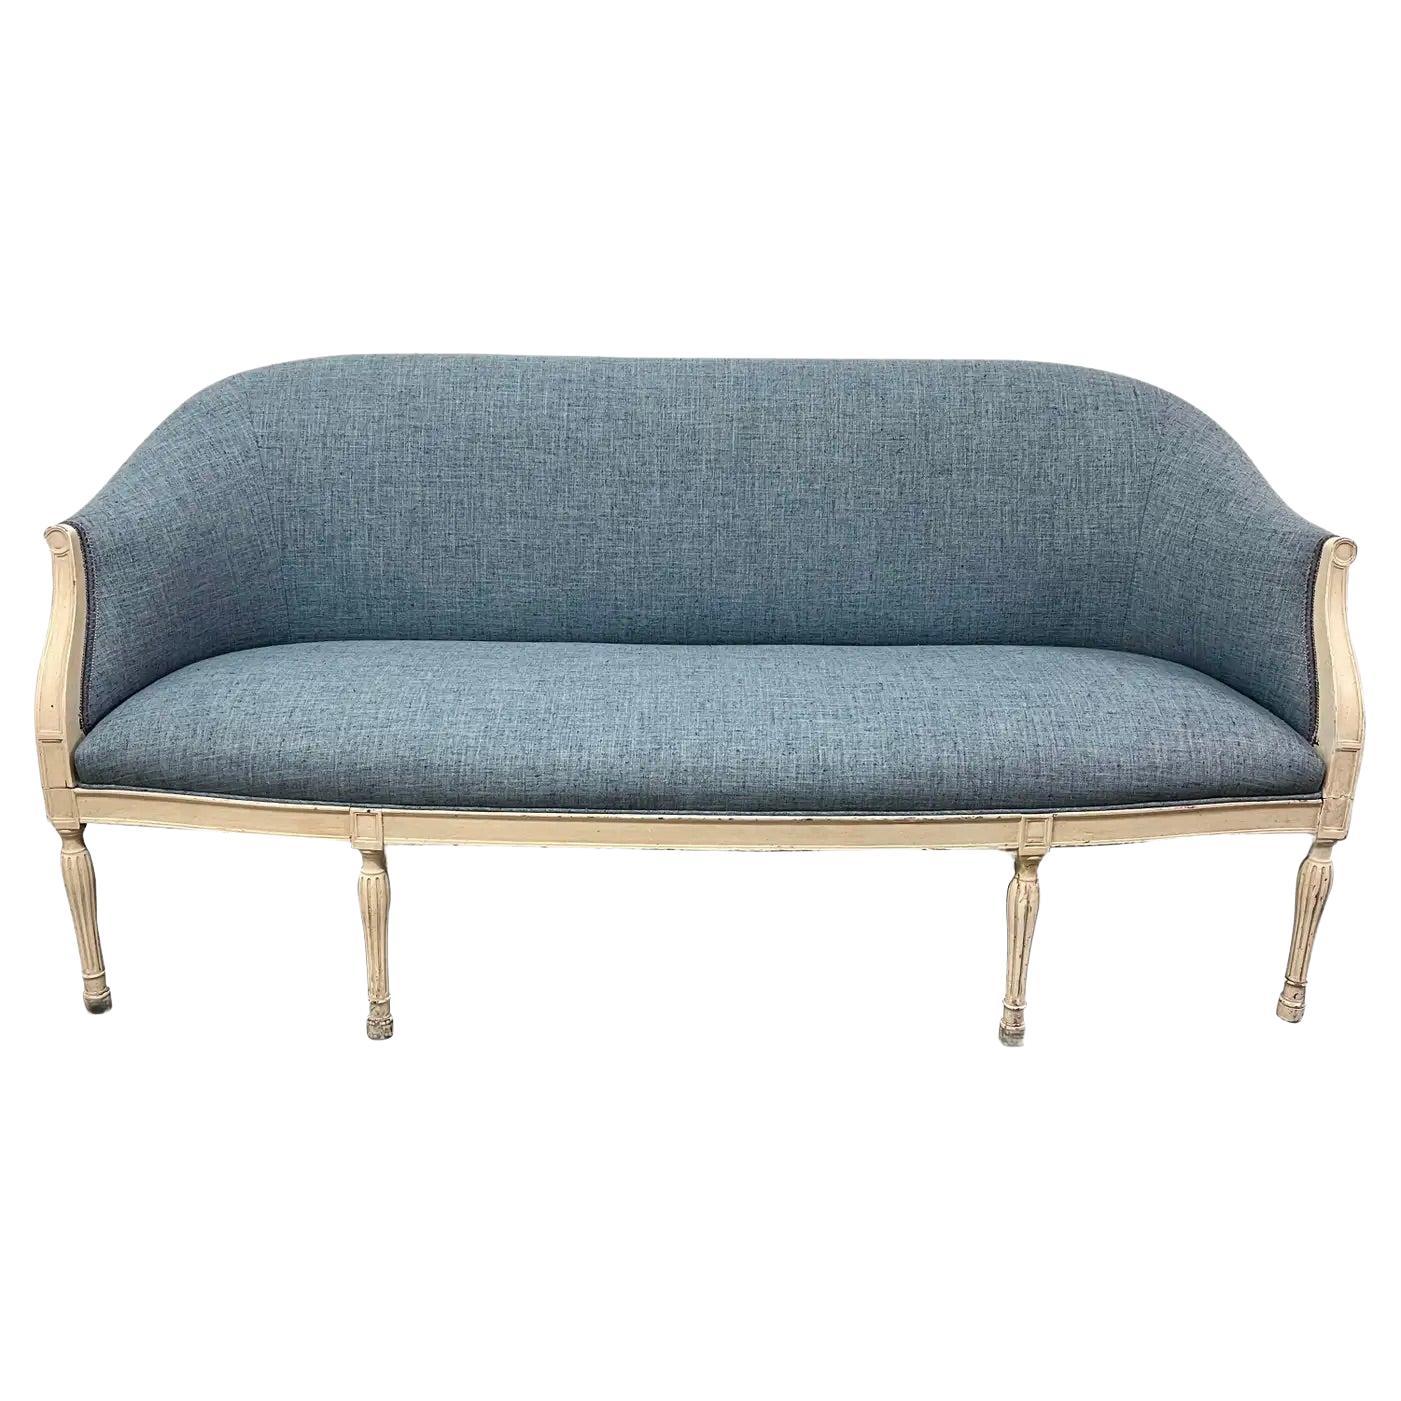 Upholstered Louis XVI Style Patinated Wood Frame Sofa  For Sale